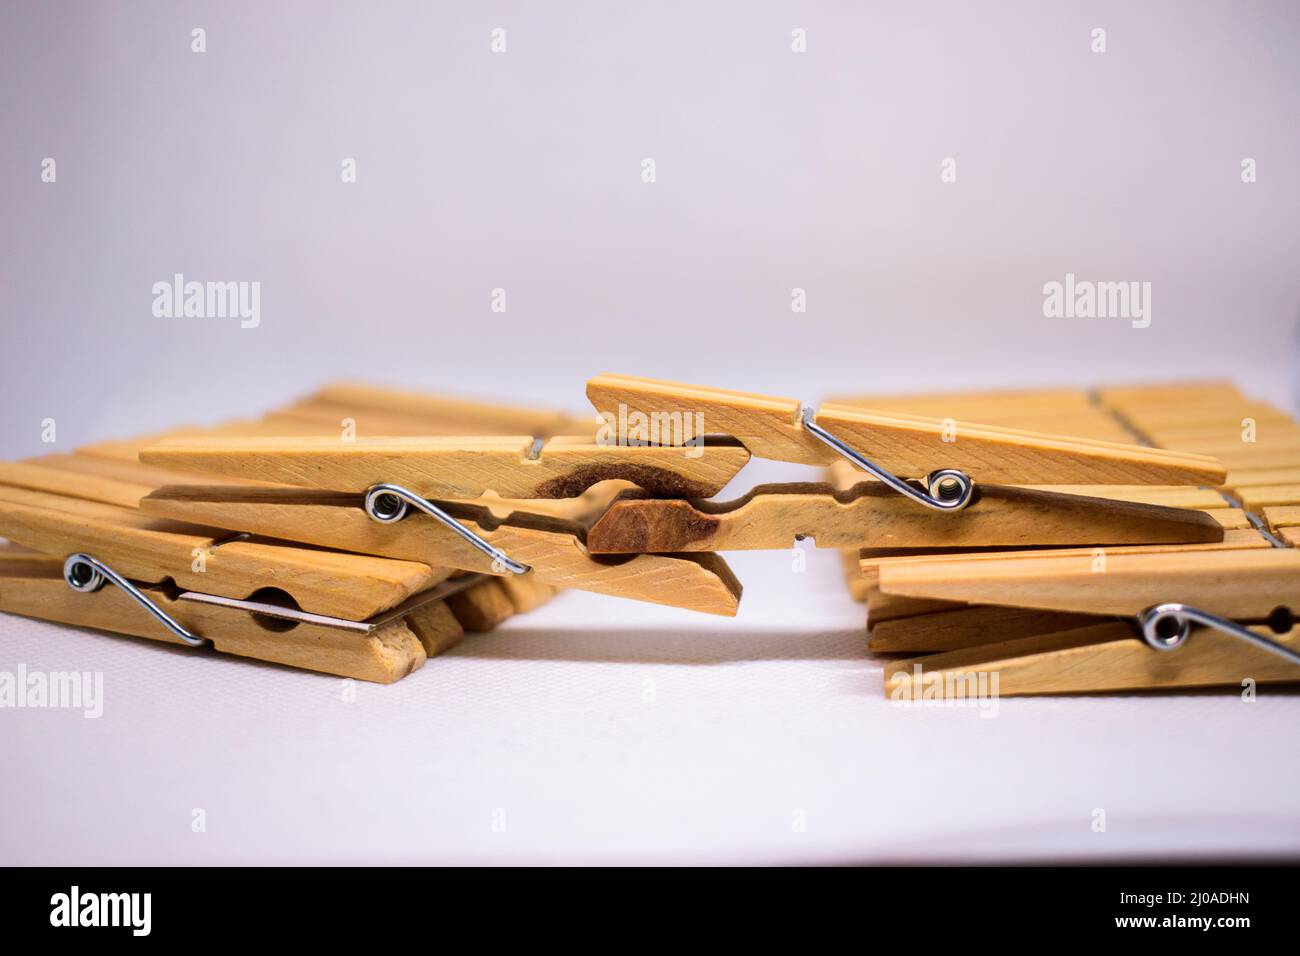 https://c8.alamy.com/comp/2J0ADHN/closeup-shot-of-the-wooden-clothes-pegs-attached-to-each-other-on-the-white-background-2J0ADHN.jpg